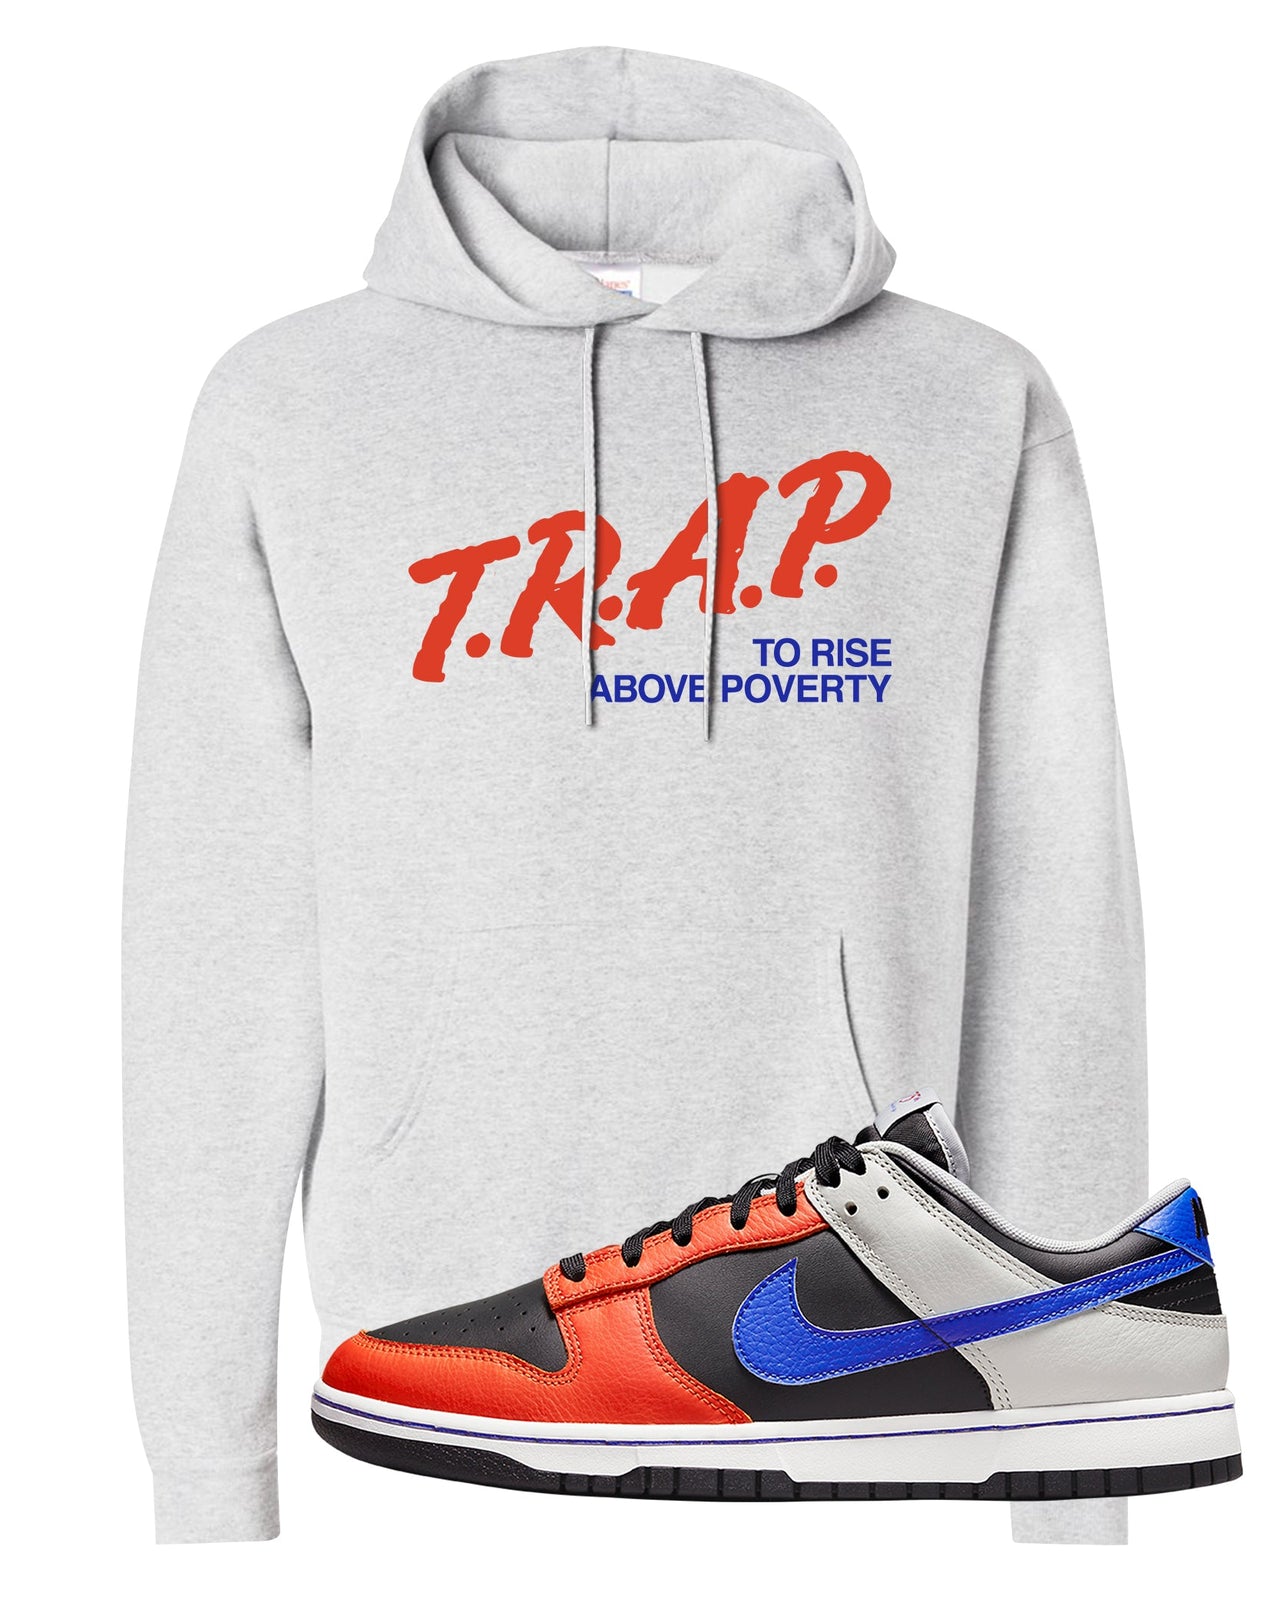 75th Anniversary Low Dunks Hoodie | Trap To Rise Above Poverty, Ash